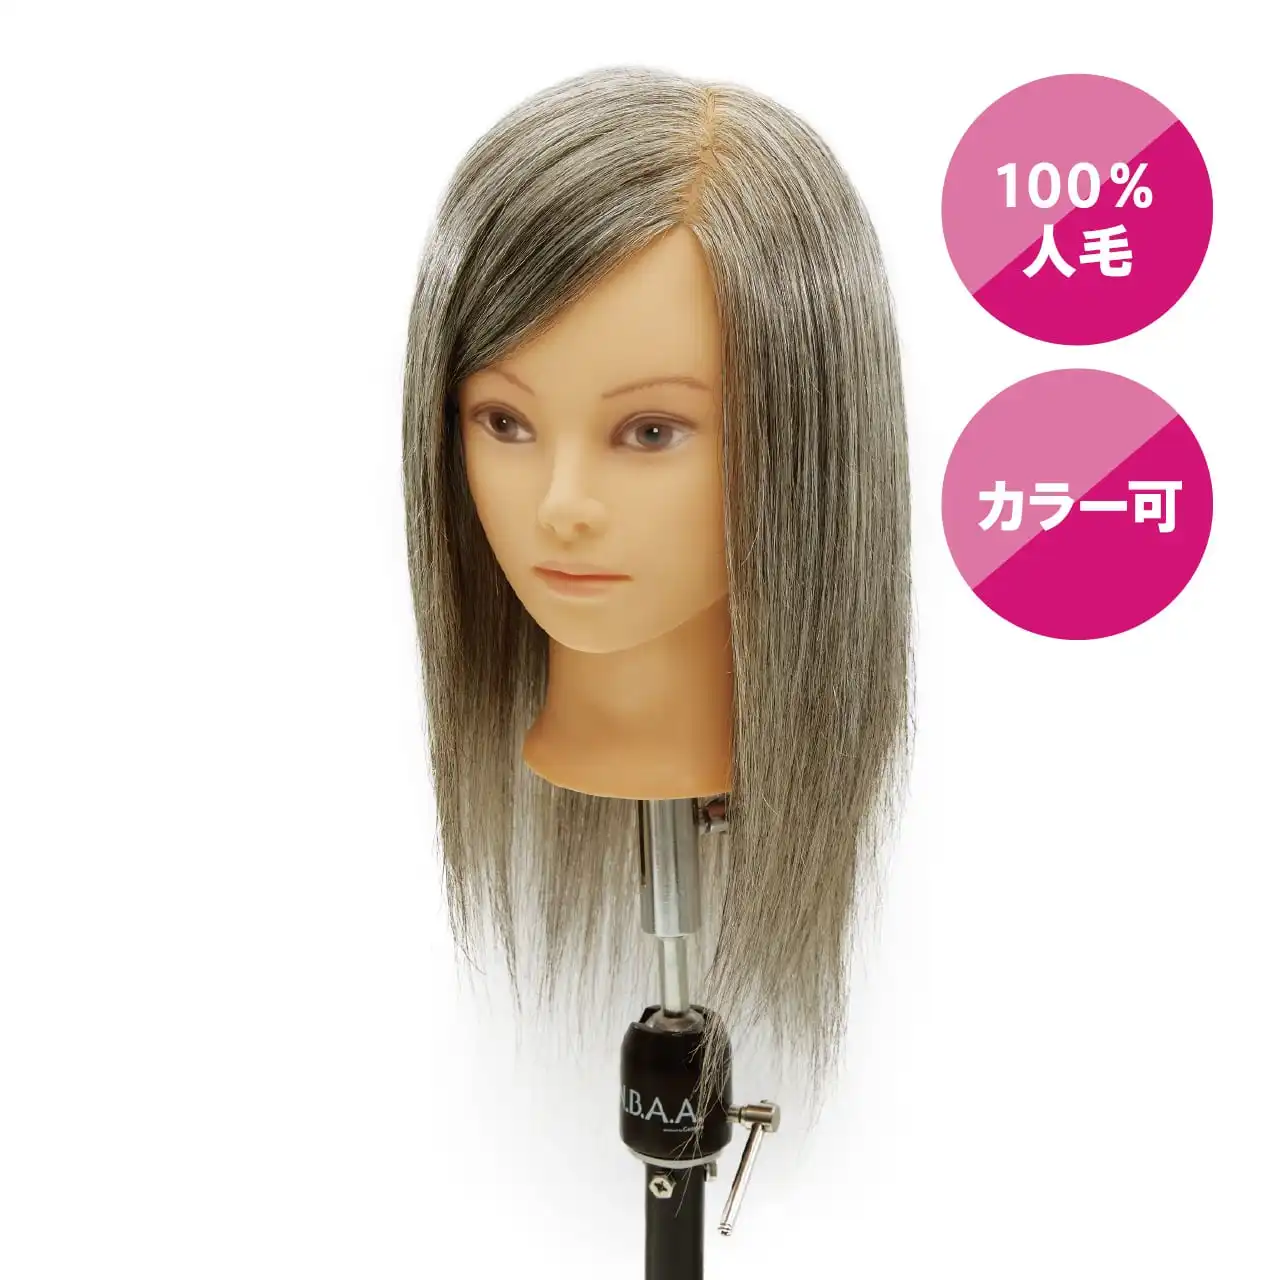 100% human hair wig "gray" cutting wig that can be colored from gray hair